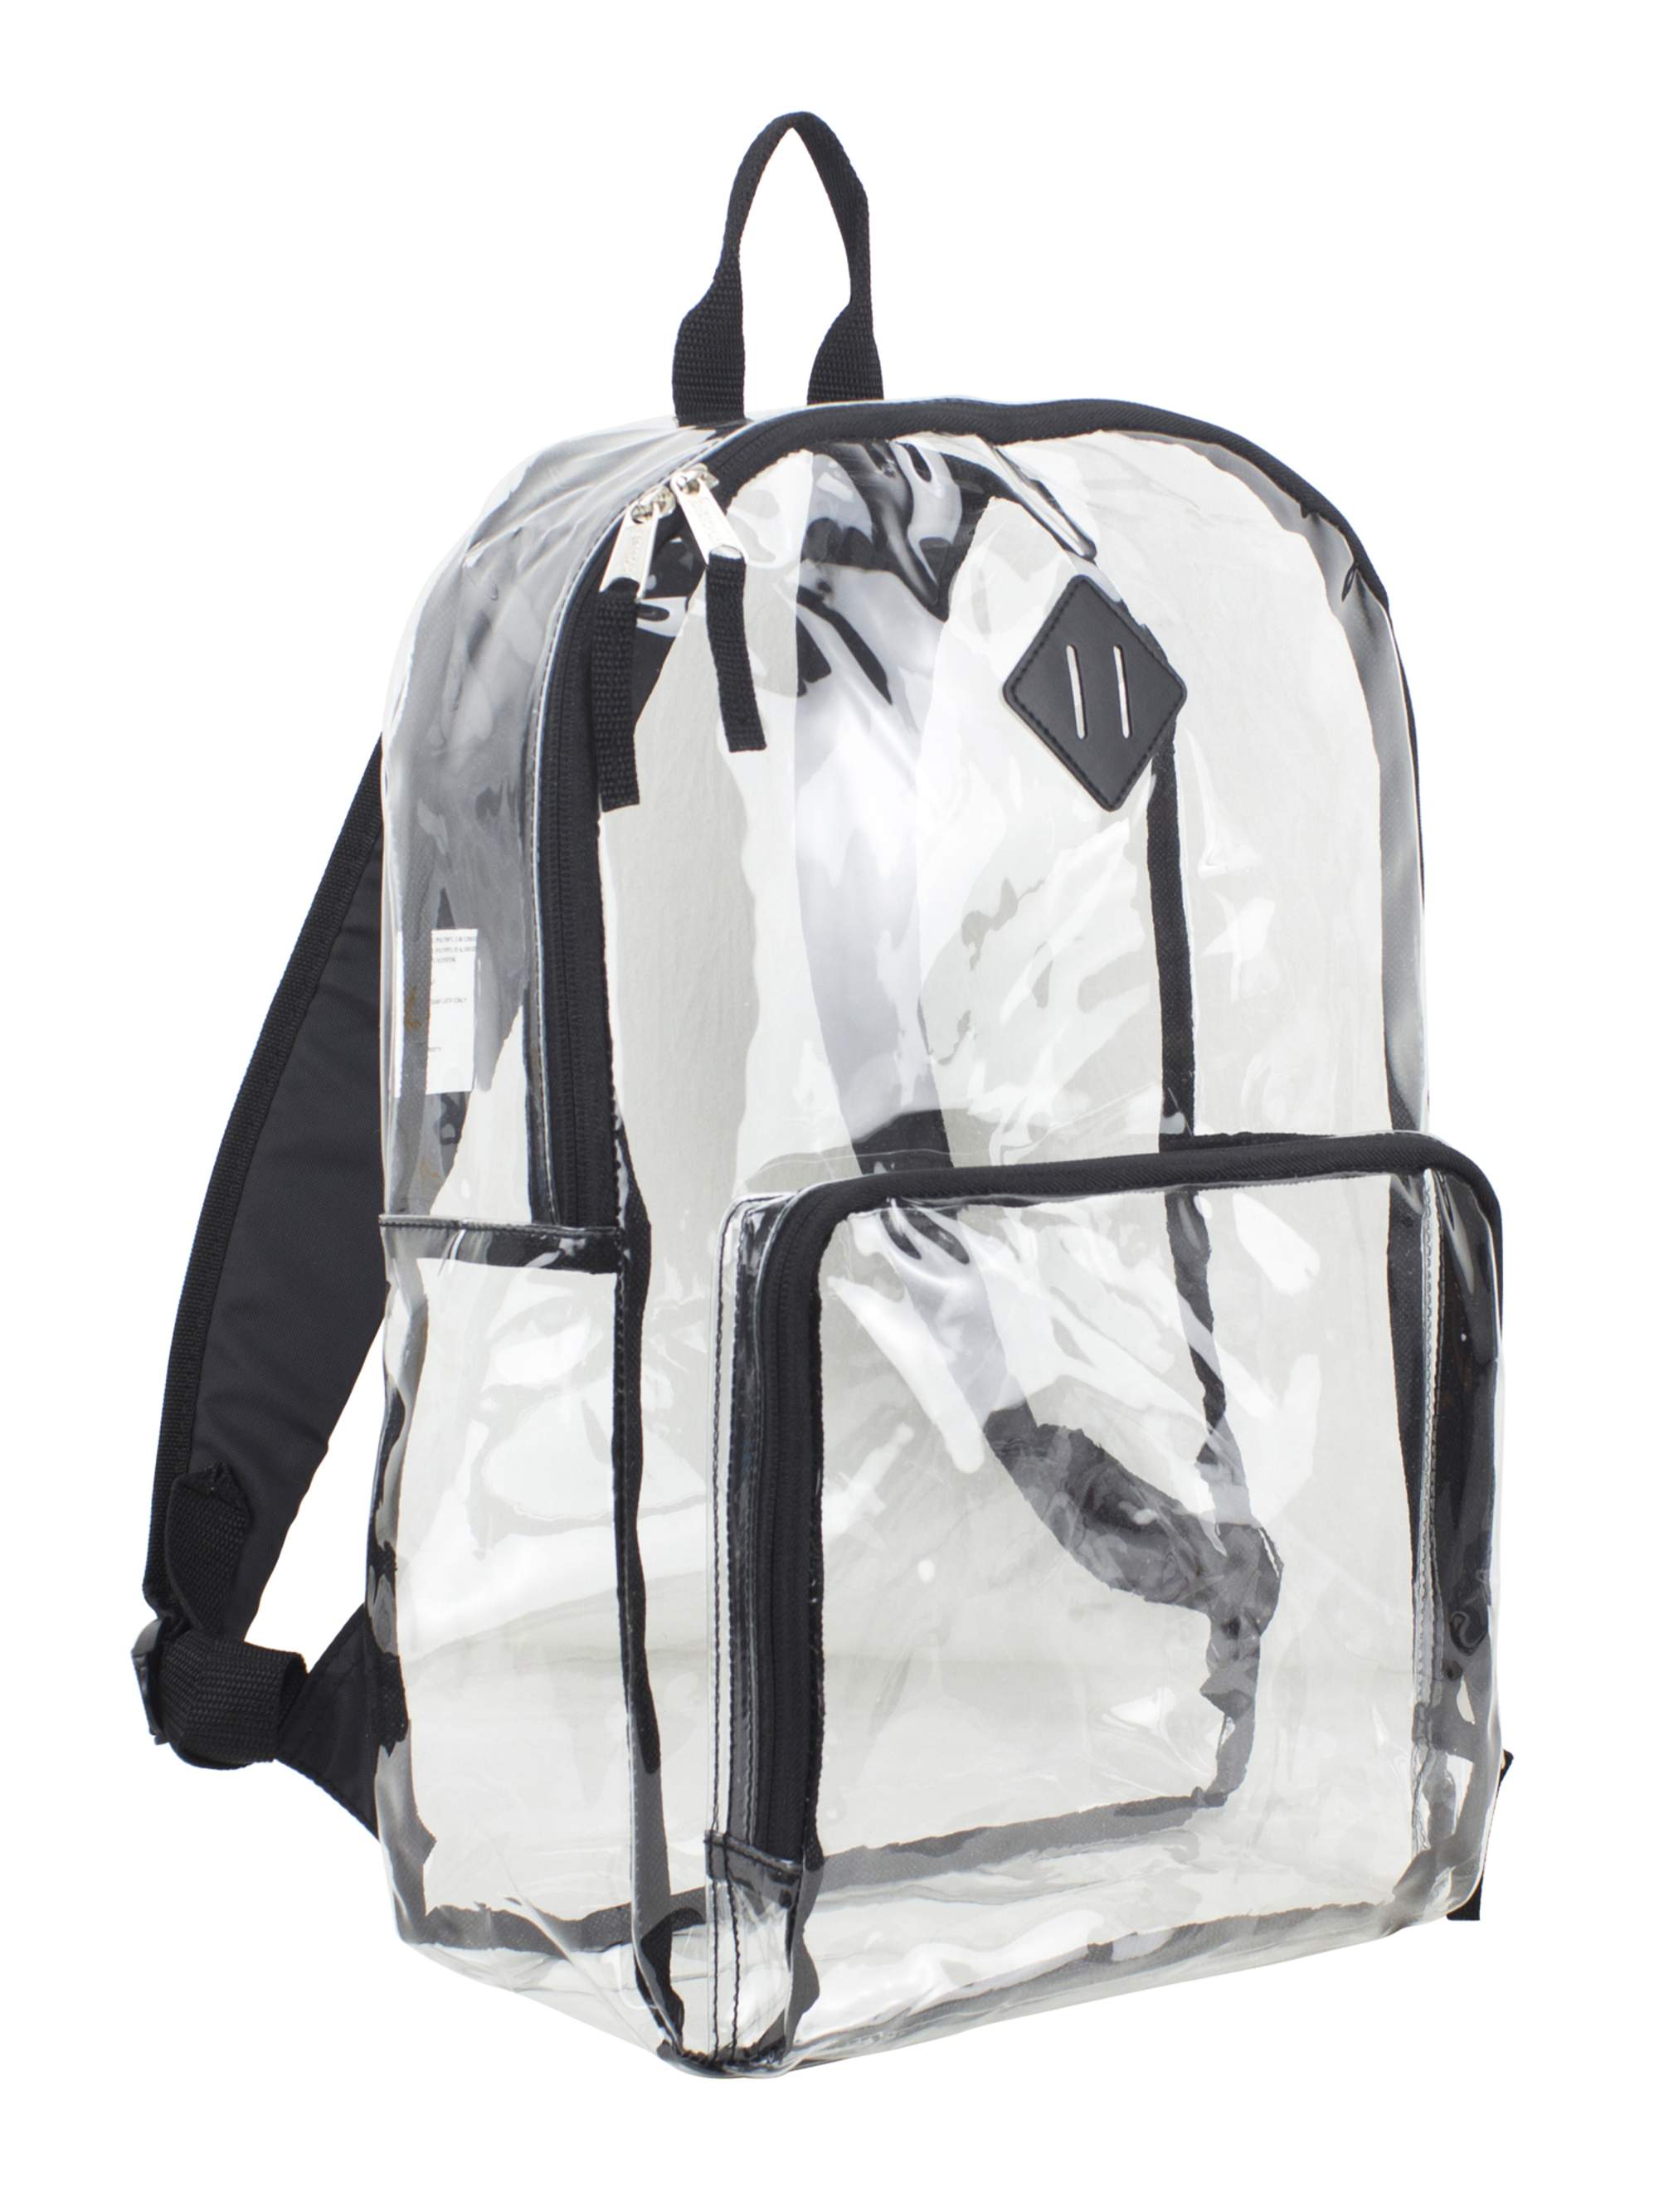 Eastsport Unisex Multi-Purpose Clear Backpack with Front Pocket, Adjustable Straps and Lash Tab Clear - image 1 of 6